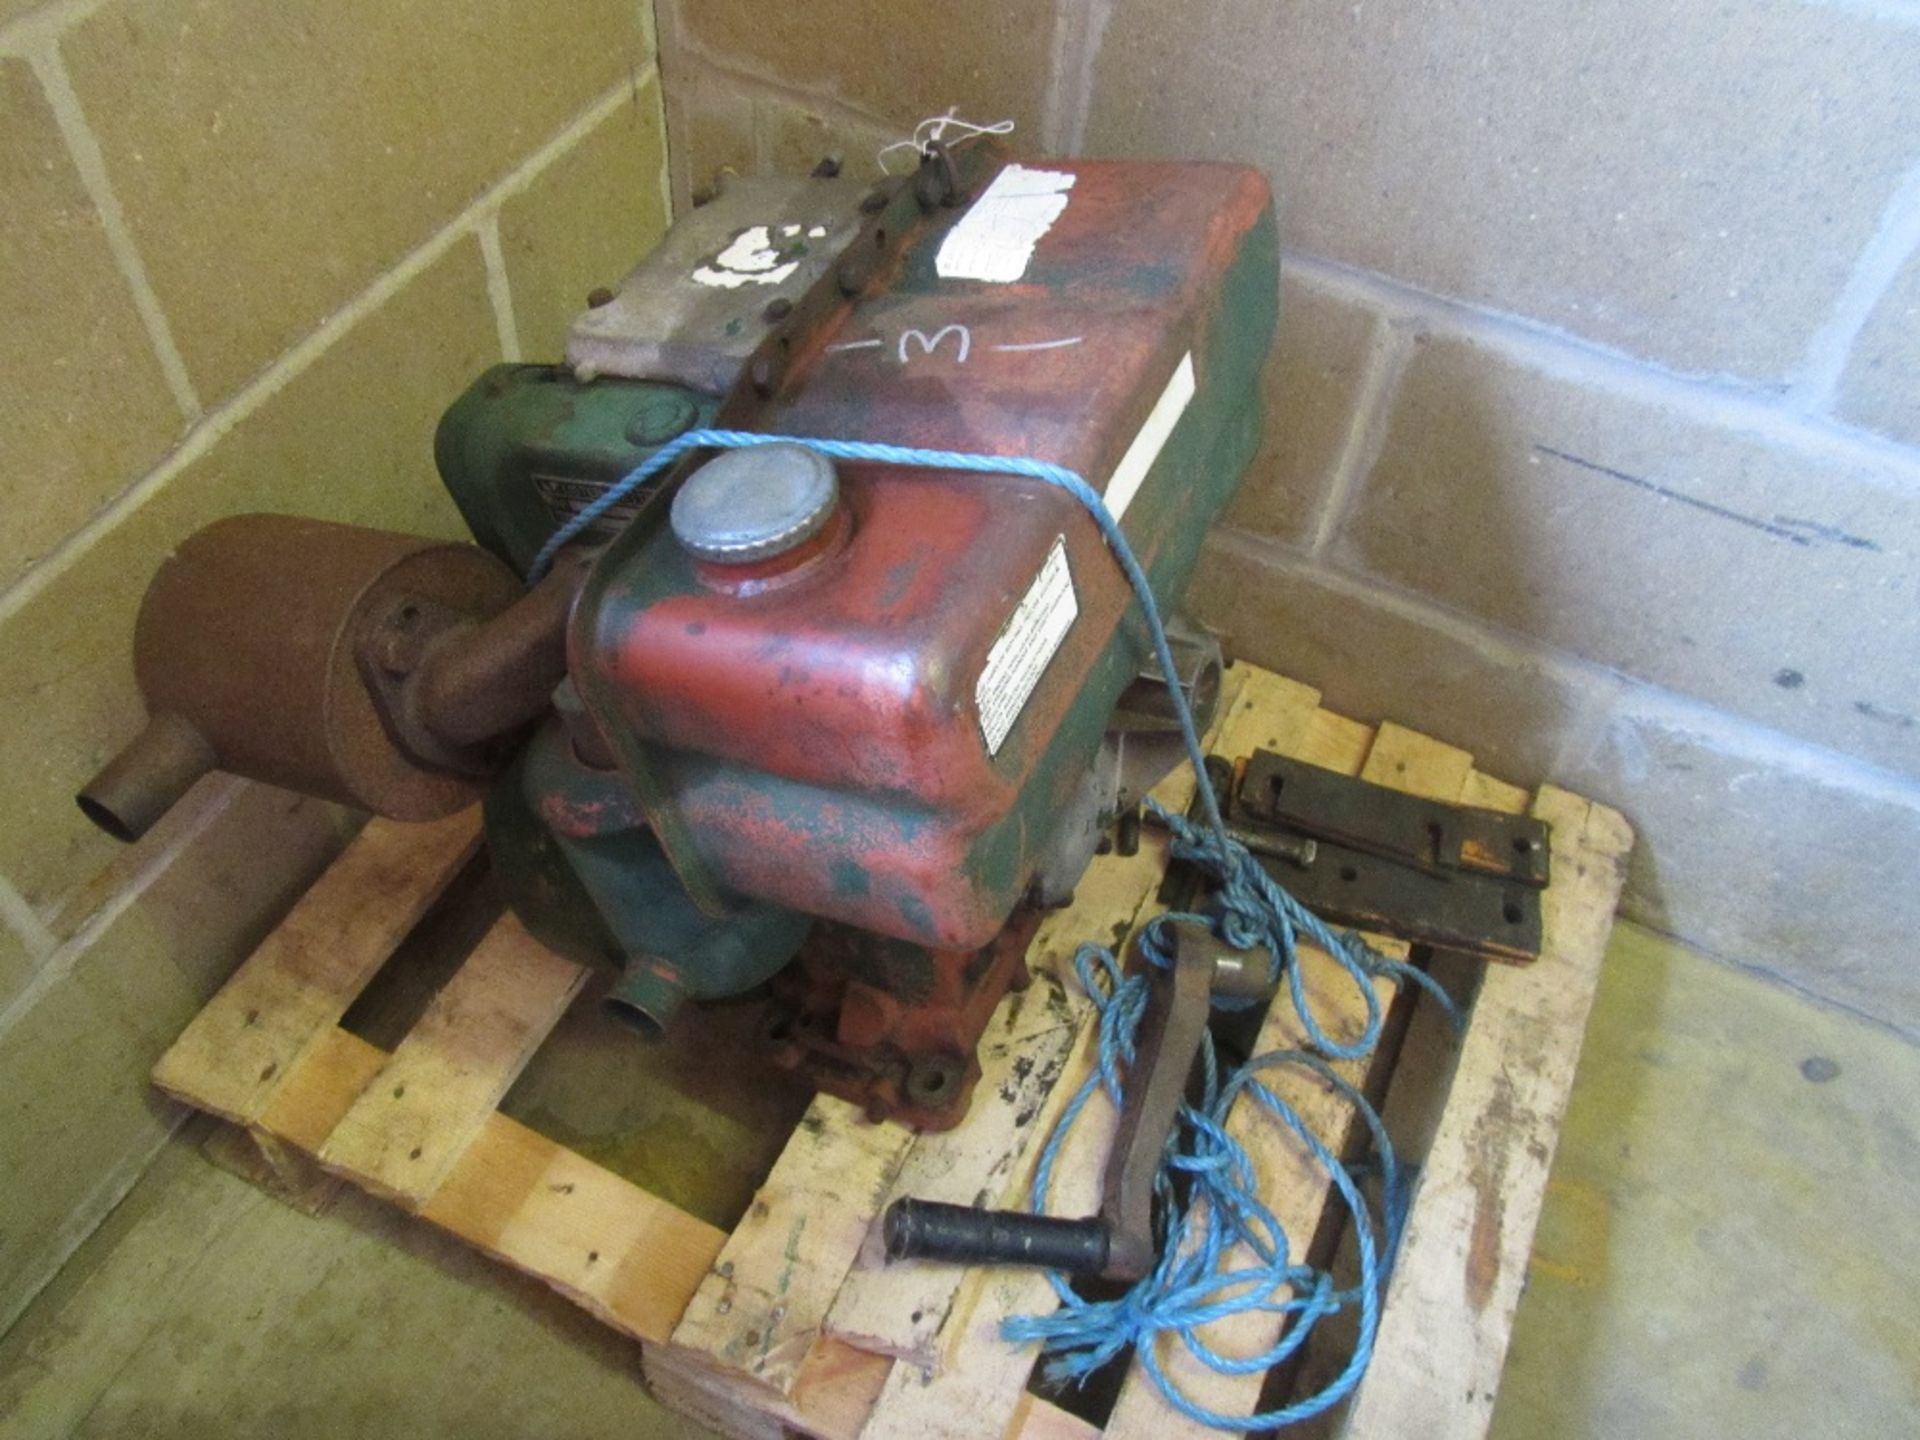 Lister LV1 Diesel Engine with Starting Handle UNRESERVED LOT - Image 2 of 2